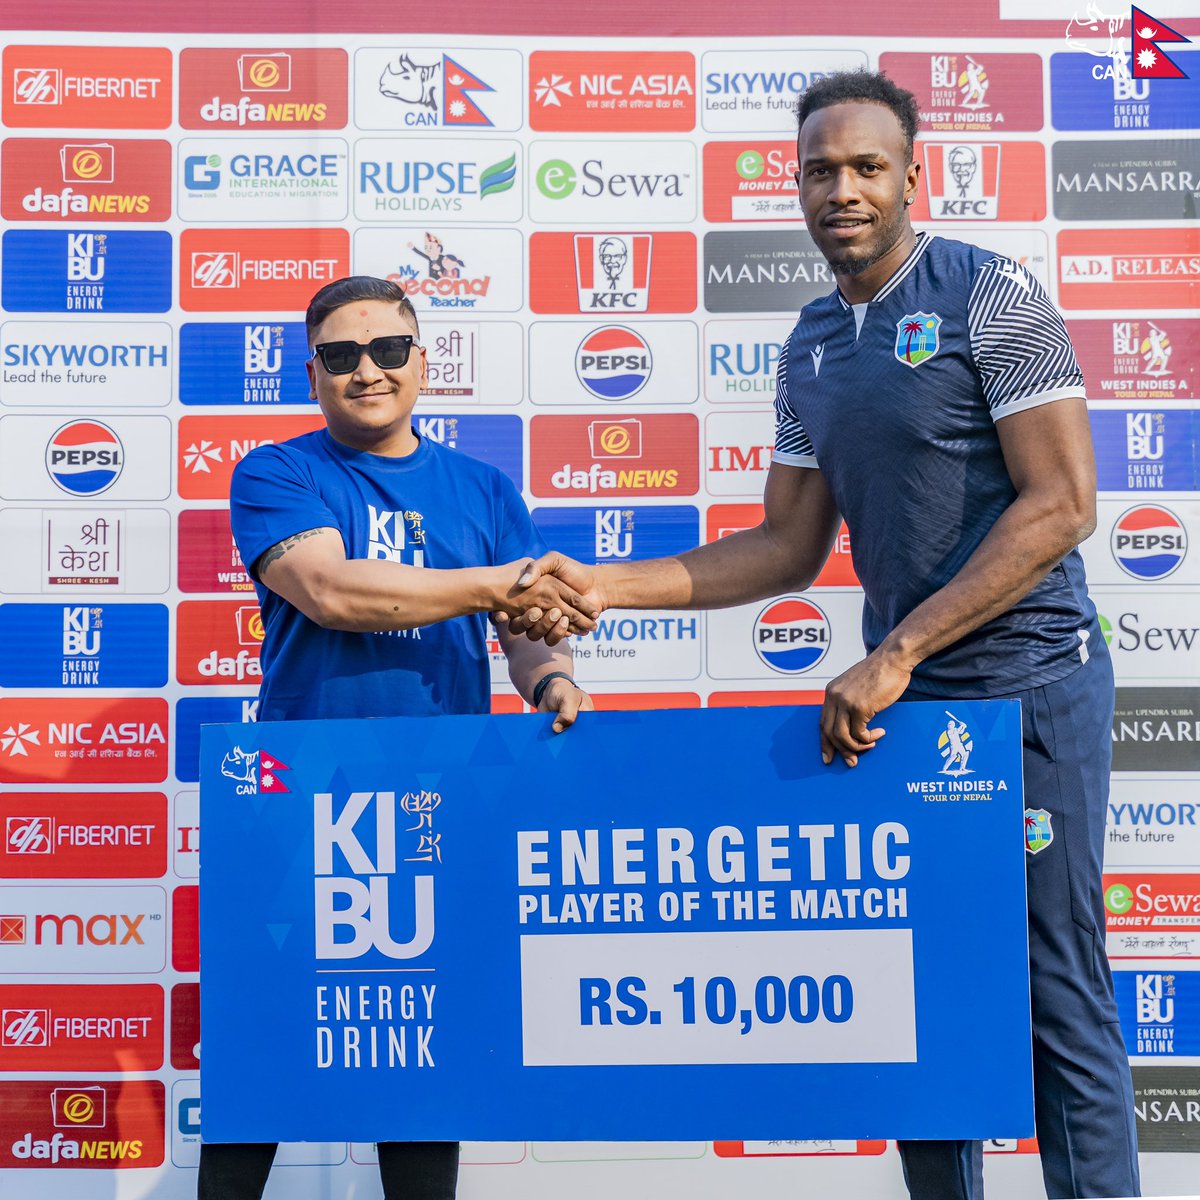 Mathew Forde with his 3 spell bags today KiBu Energetic Player of the Match 🏏

#WIndiesATourOfNEP | #WorldCupYear2024 | #NepaliCricket